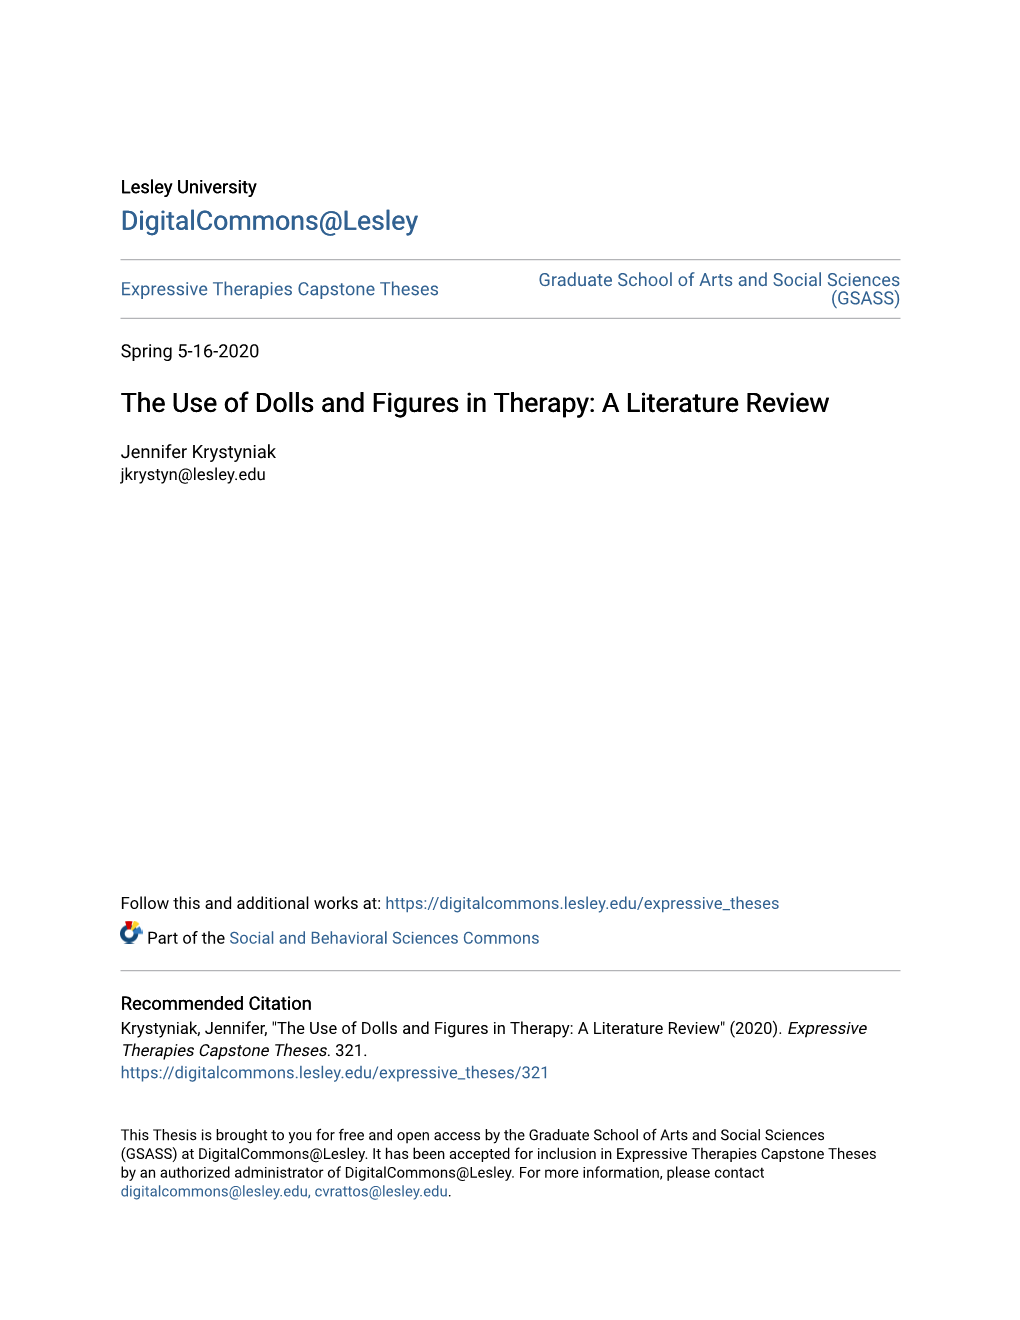 The Use of Dolls and Figures in Therapy: a Literature Review